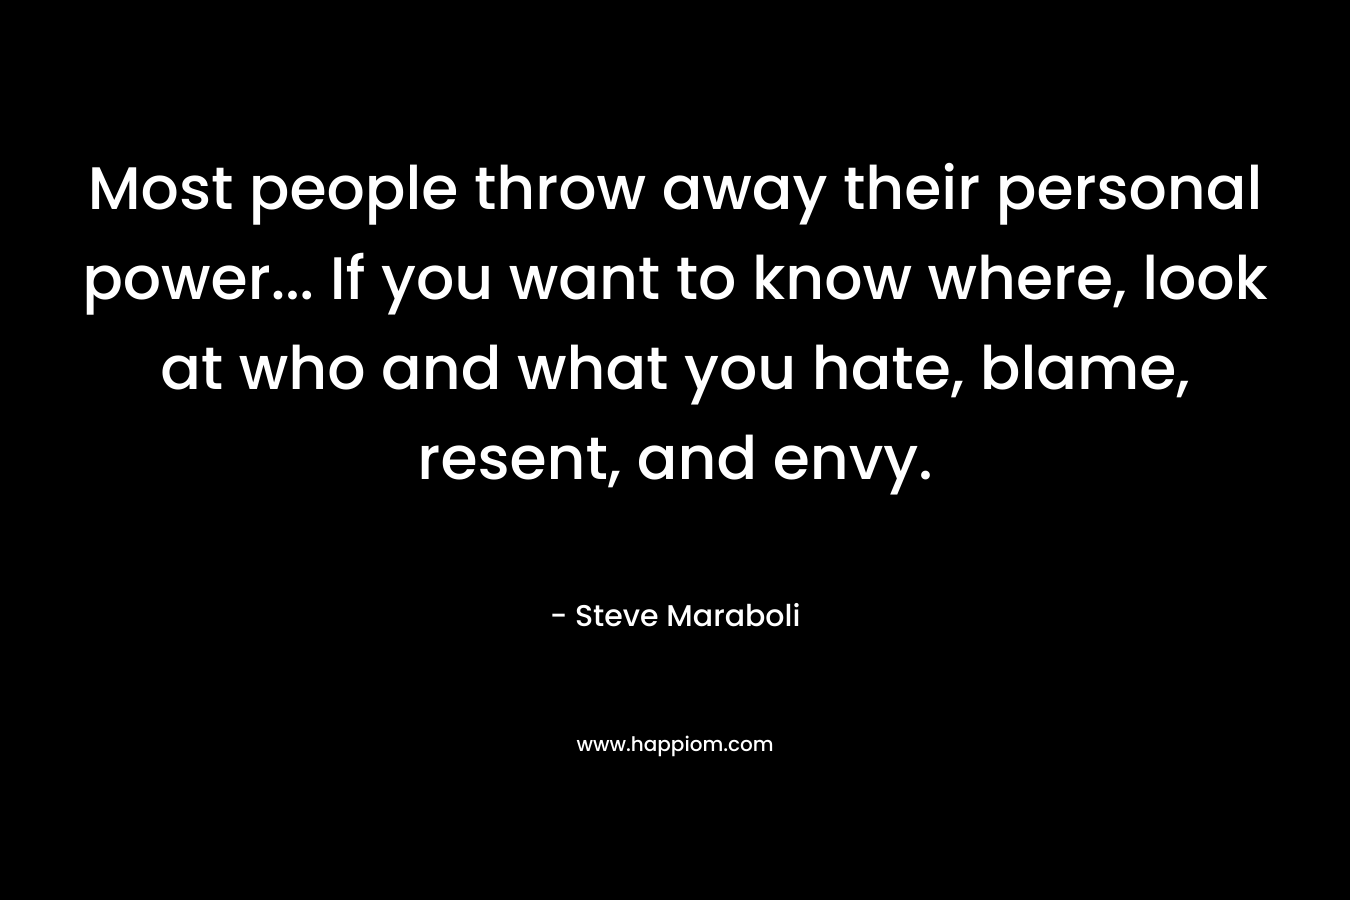 Most people throw away their personal power… If you want to know where, look at who and what you hate, blame, resent, and envy. – Steve Maraboli